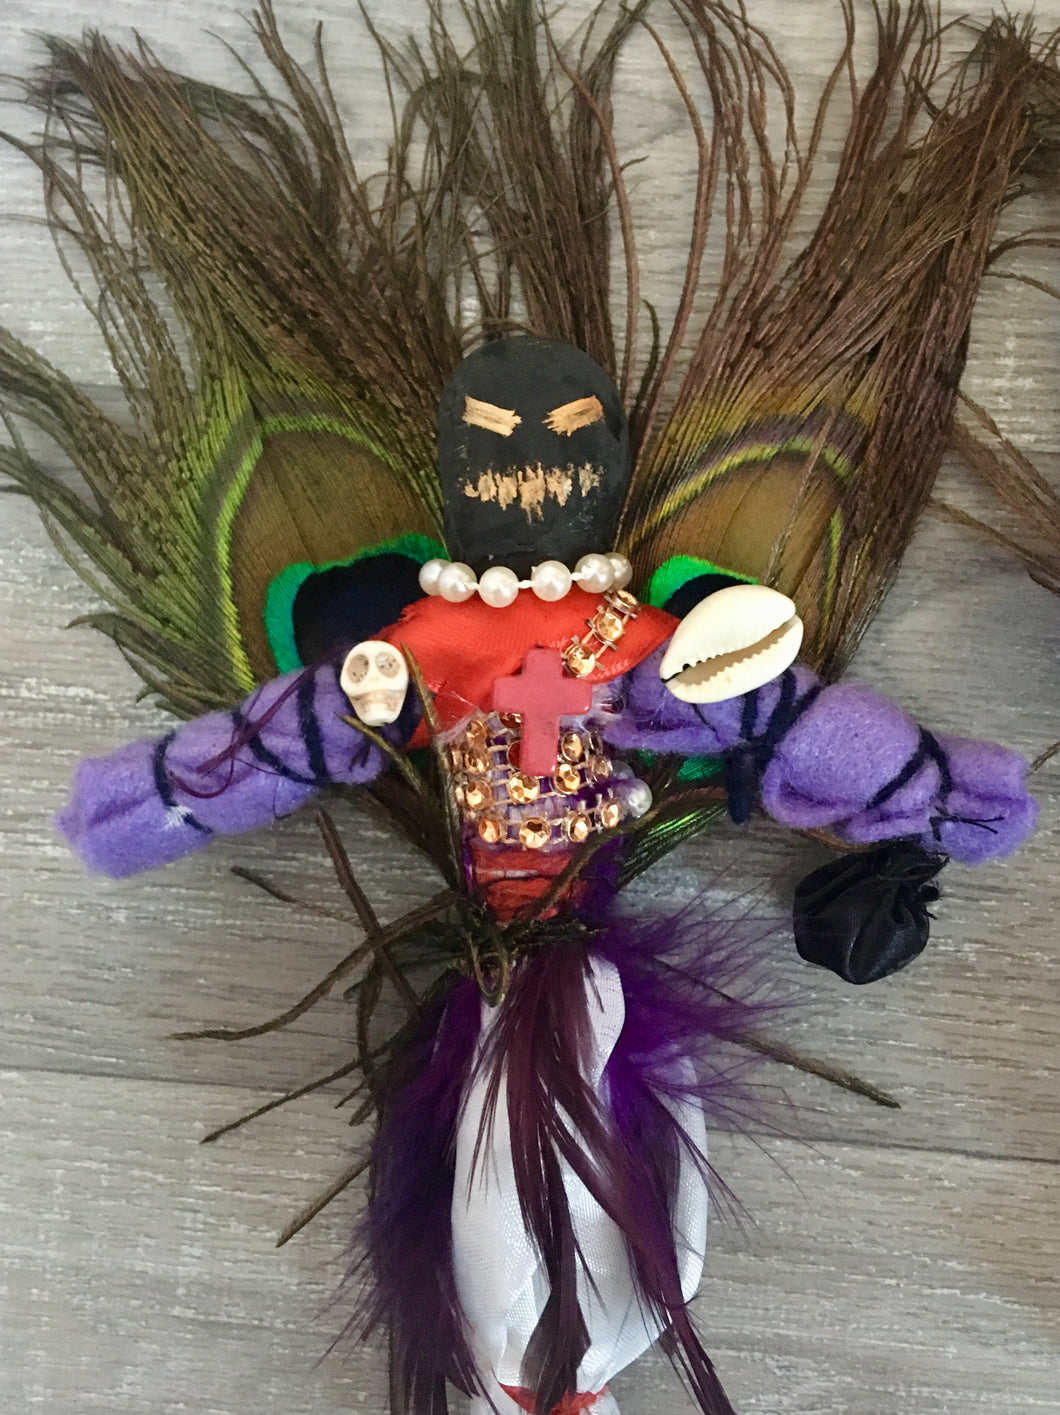 Custom made voodoo doll love/protection/luck